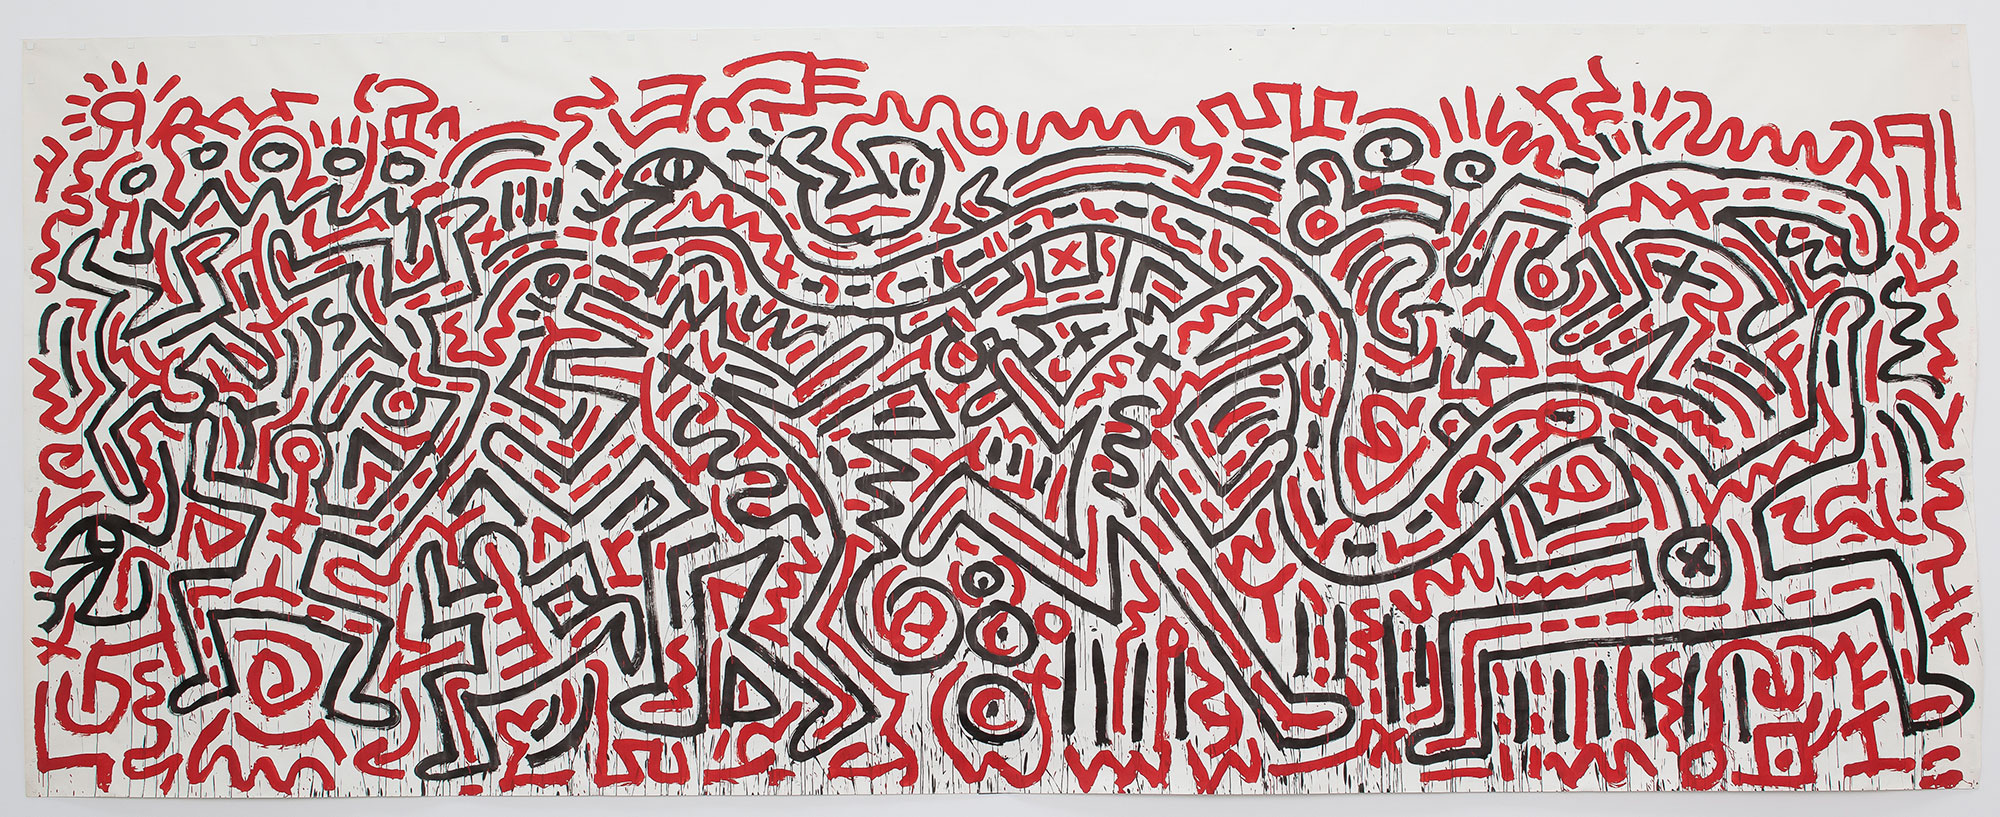 Keith Haring,  Red, 1982–84 